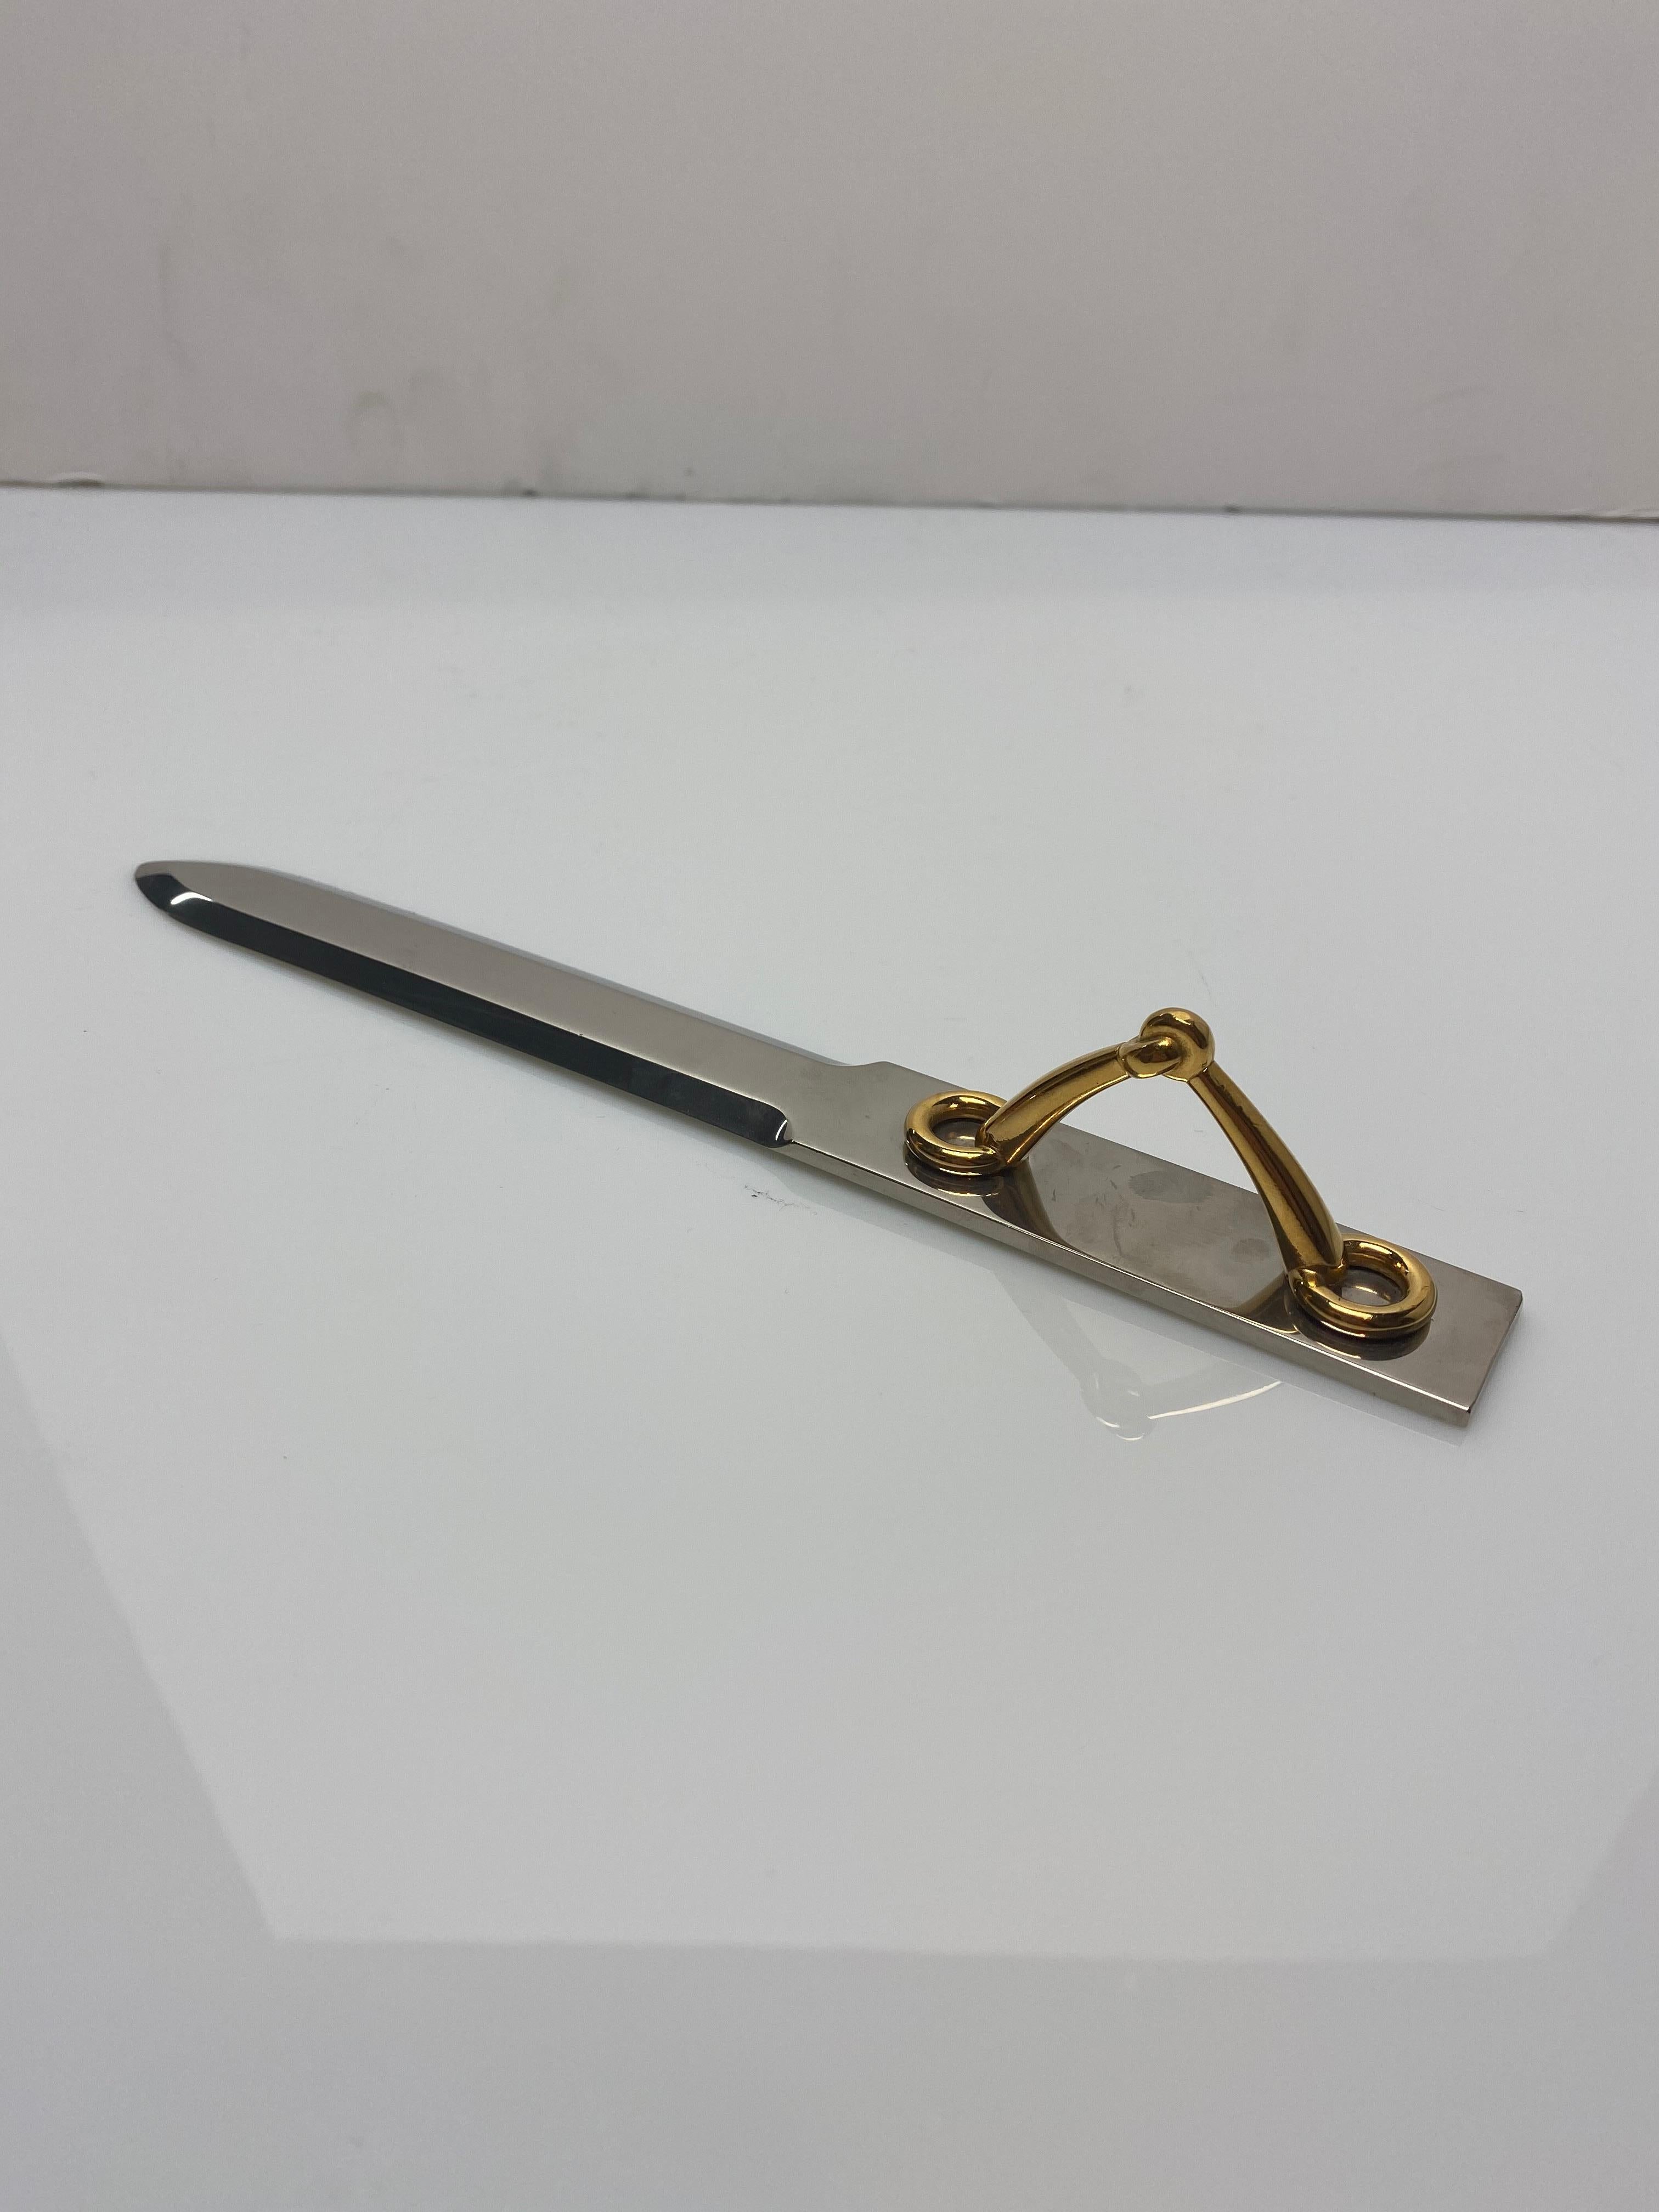 A fine and elegant letter opener by Hermes. Featuring a gold-plated horse bit used as the handle of the letter opener.